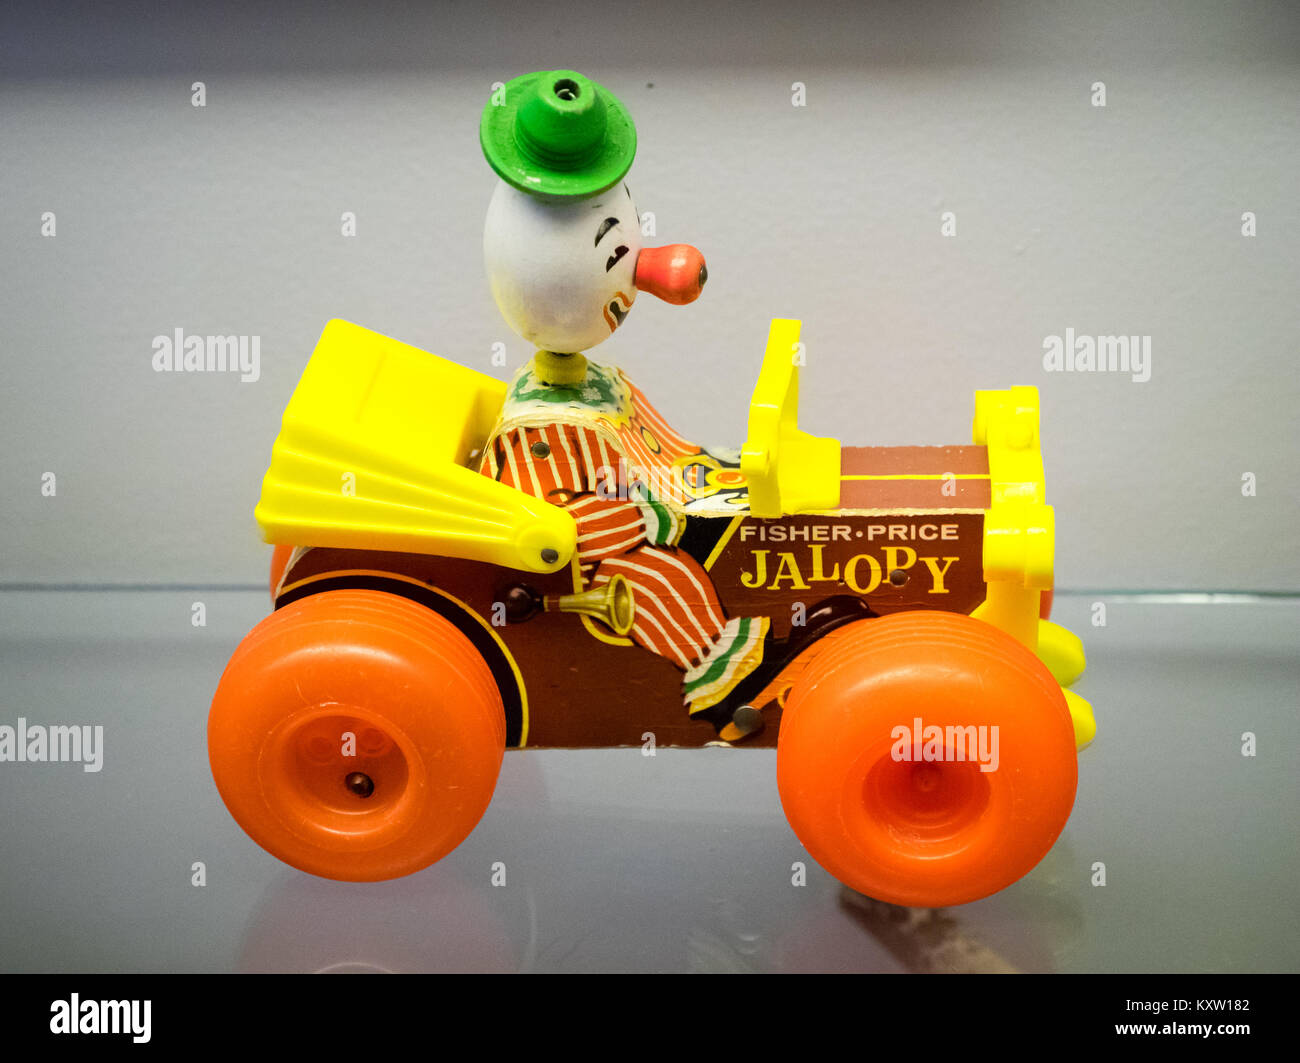 A Fisher-Price Jolly Jalopy #724, a classic toy manufactured by Fisher-Price from 1965-1978. Stock Photo